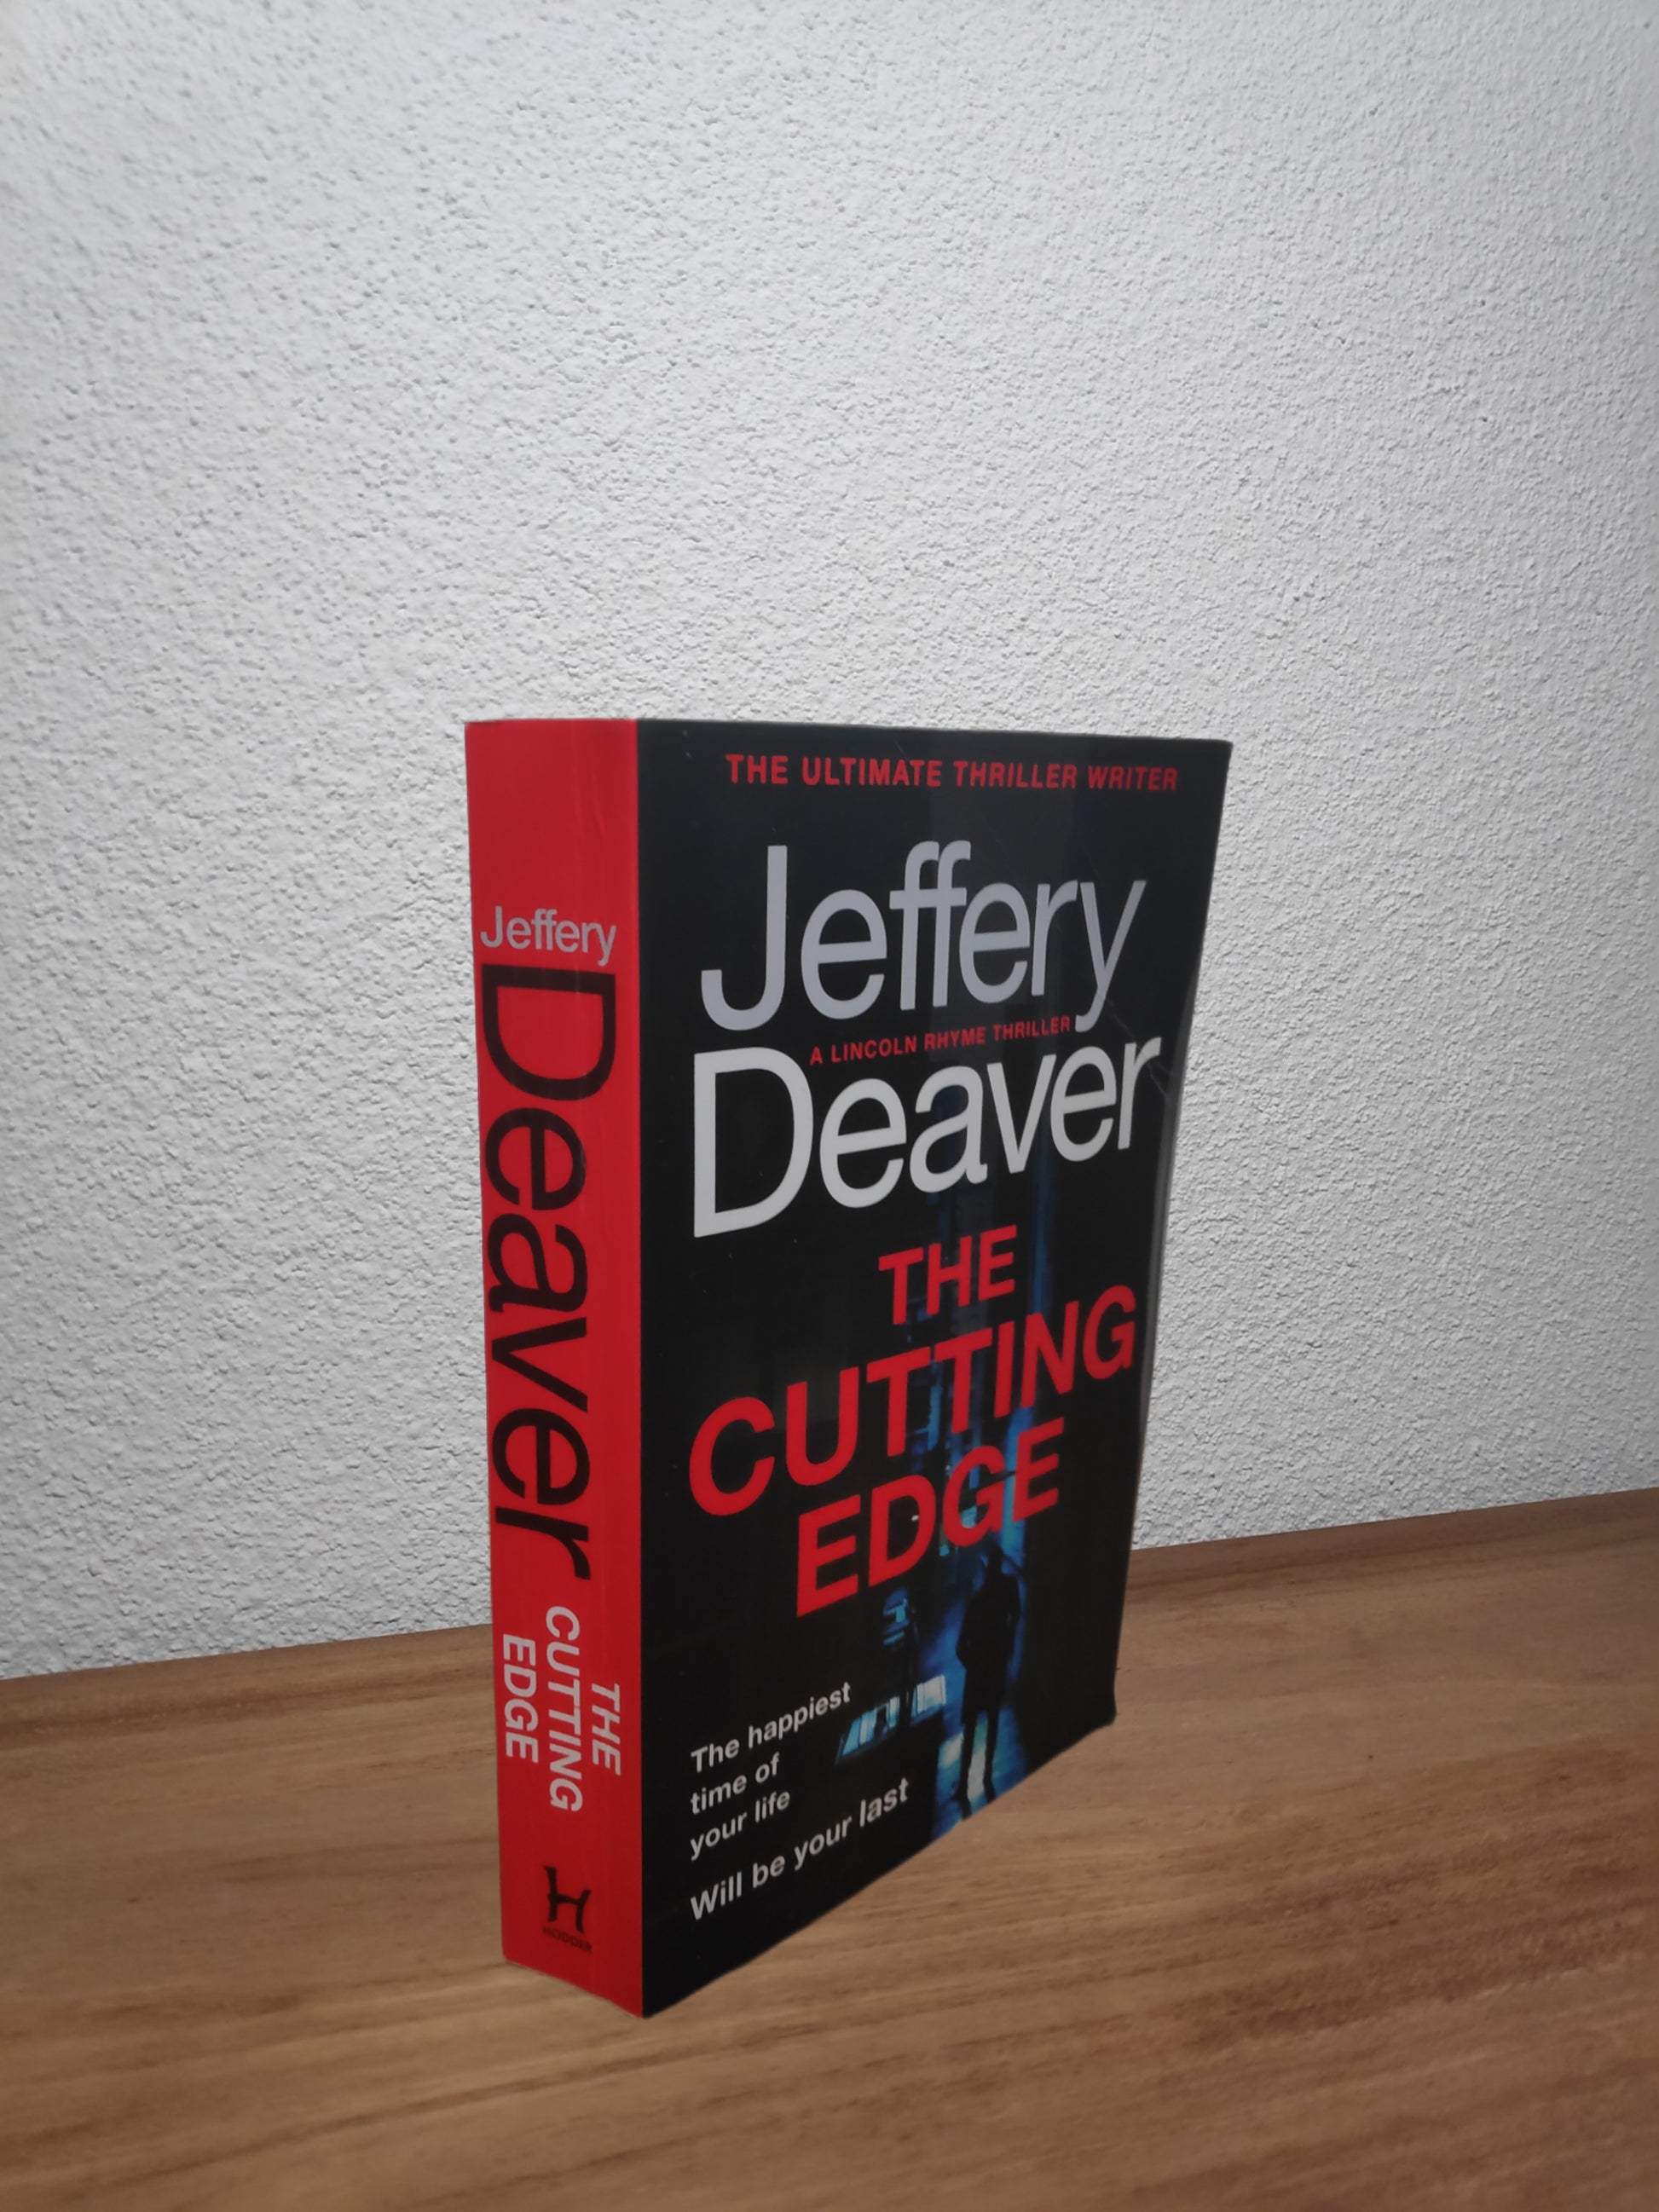 Second-hand english book to deliver in Zurich & Switzerland - Jeffery Deaver - The Cutting Edge